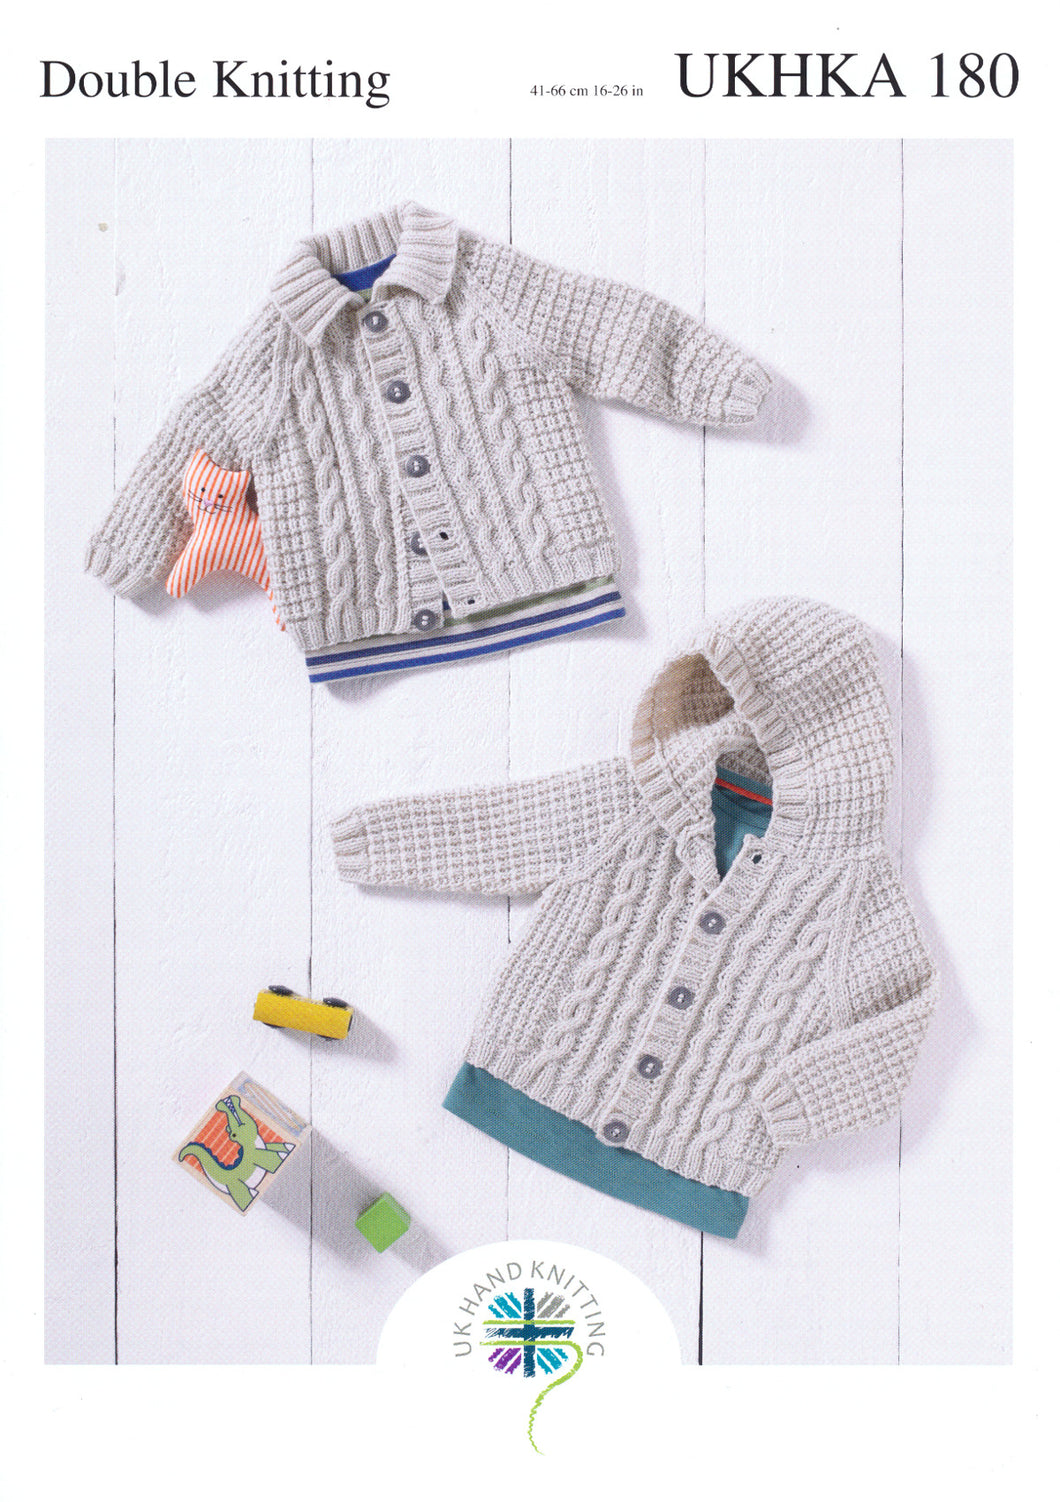 Double Knitting Pattern for Baby's Cardigans (UKHKA 180)